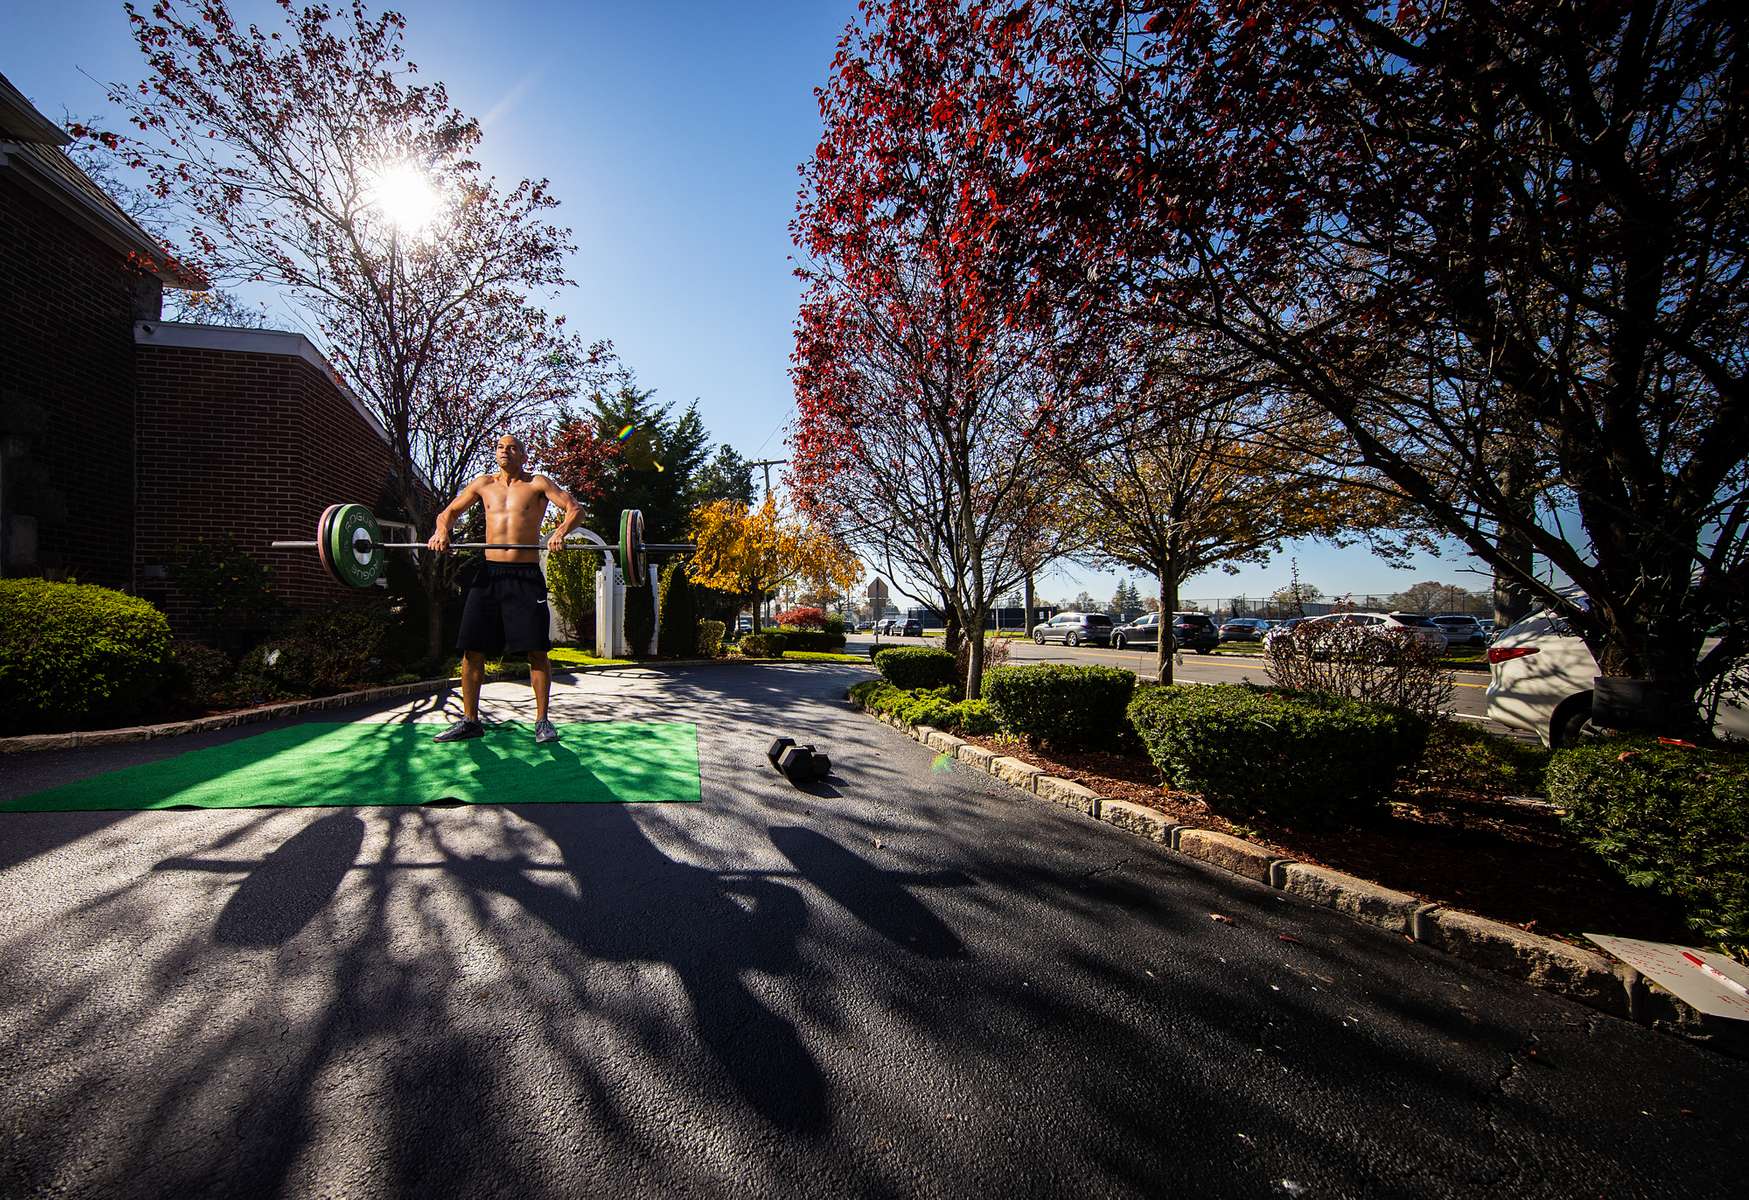  Loneil Jenkins exercises in front of his home with his virtual Fitness Trainer Dennis Guerrero on November 9th, 2020 in Oceanside, New York.  In March of 2014, Dennis Guerrero and his business partner opened a gym on Long Island. The pair shared a passion for fitness, a dream of creating a local community of like-minded people and a willingness to take a risk. Over the next six years, hundreds of members experienced and embraced a unique environment that fostered a palpable energy, helping athletes of all ages and abilities reach their potential.  The gym became a place to share achievements, work through losses and overcome illness. But like so many other businesses, it seemingly had no way of overcoming the financial impact and ongoing uncertainty of a global pandemic. With the arrival of Covid-19, the gym shut its doors back in March, with no idea when it would reopen. The owners, though, were far from done. They lent out every piece of equipment they owned to the gym’s members, continued to pay their staff and worked to set up outdoor classes in hopes of keeping their membership active and healthy. As the shutdown stretched on, it became clear that the physical gym was closed for good.  They have since reinvented themselves and are now called Life Outside the Box.  Their business model has changed drastically, and all their workouts have gone virtual.  The workouts are conducted by a small group of fitness trainers led by Guerrero.  The members pay a monthly fee and can take live Zoom fitness classes.  They are coached by the virtual trainers in real time.  More and more people have reconstructed their garages, spare rooms, backyards, and basements into home gyms since the COVID-19 pandemic hit the United States. 